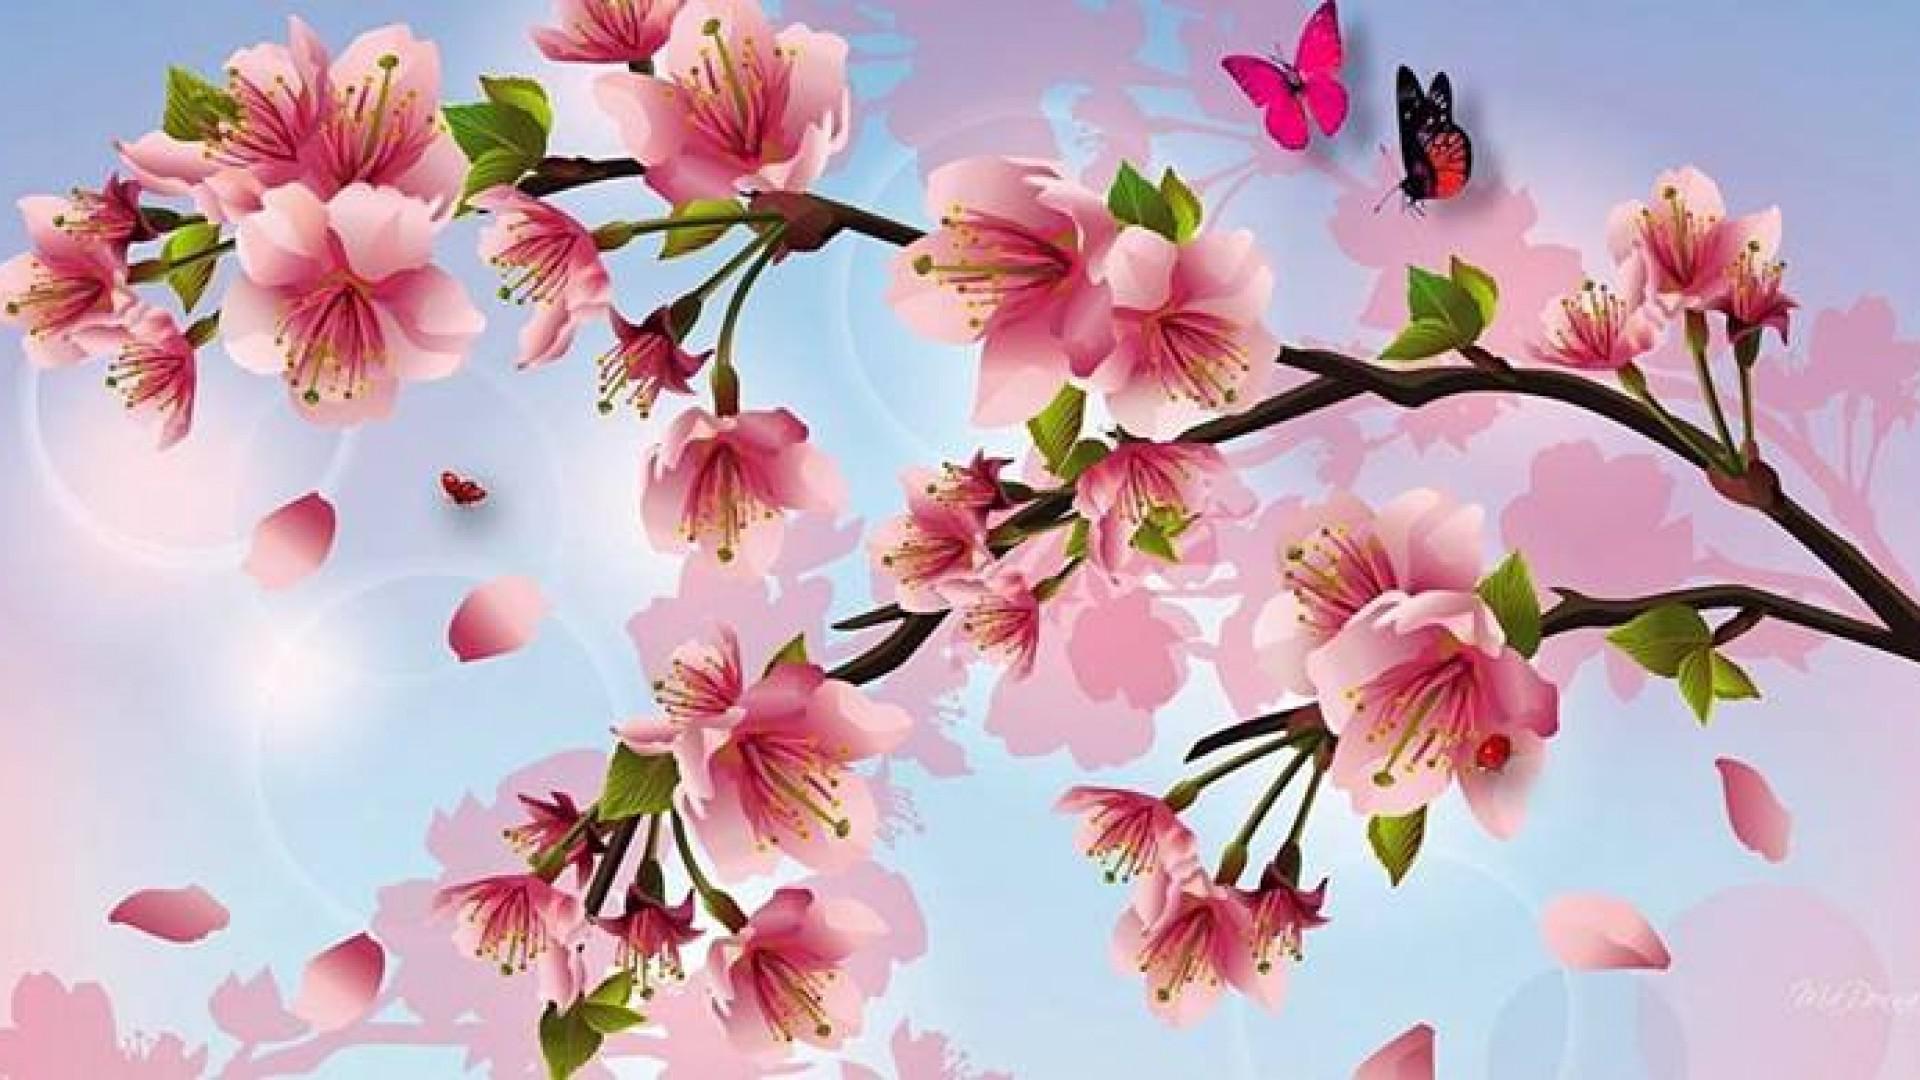 Cherry Blossom Painting Wallpapers Wallpaper Cave